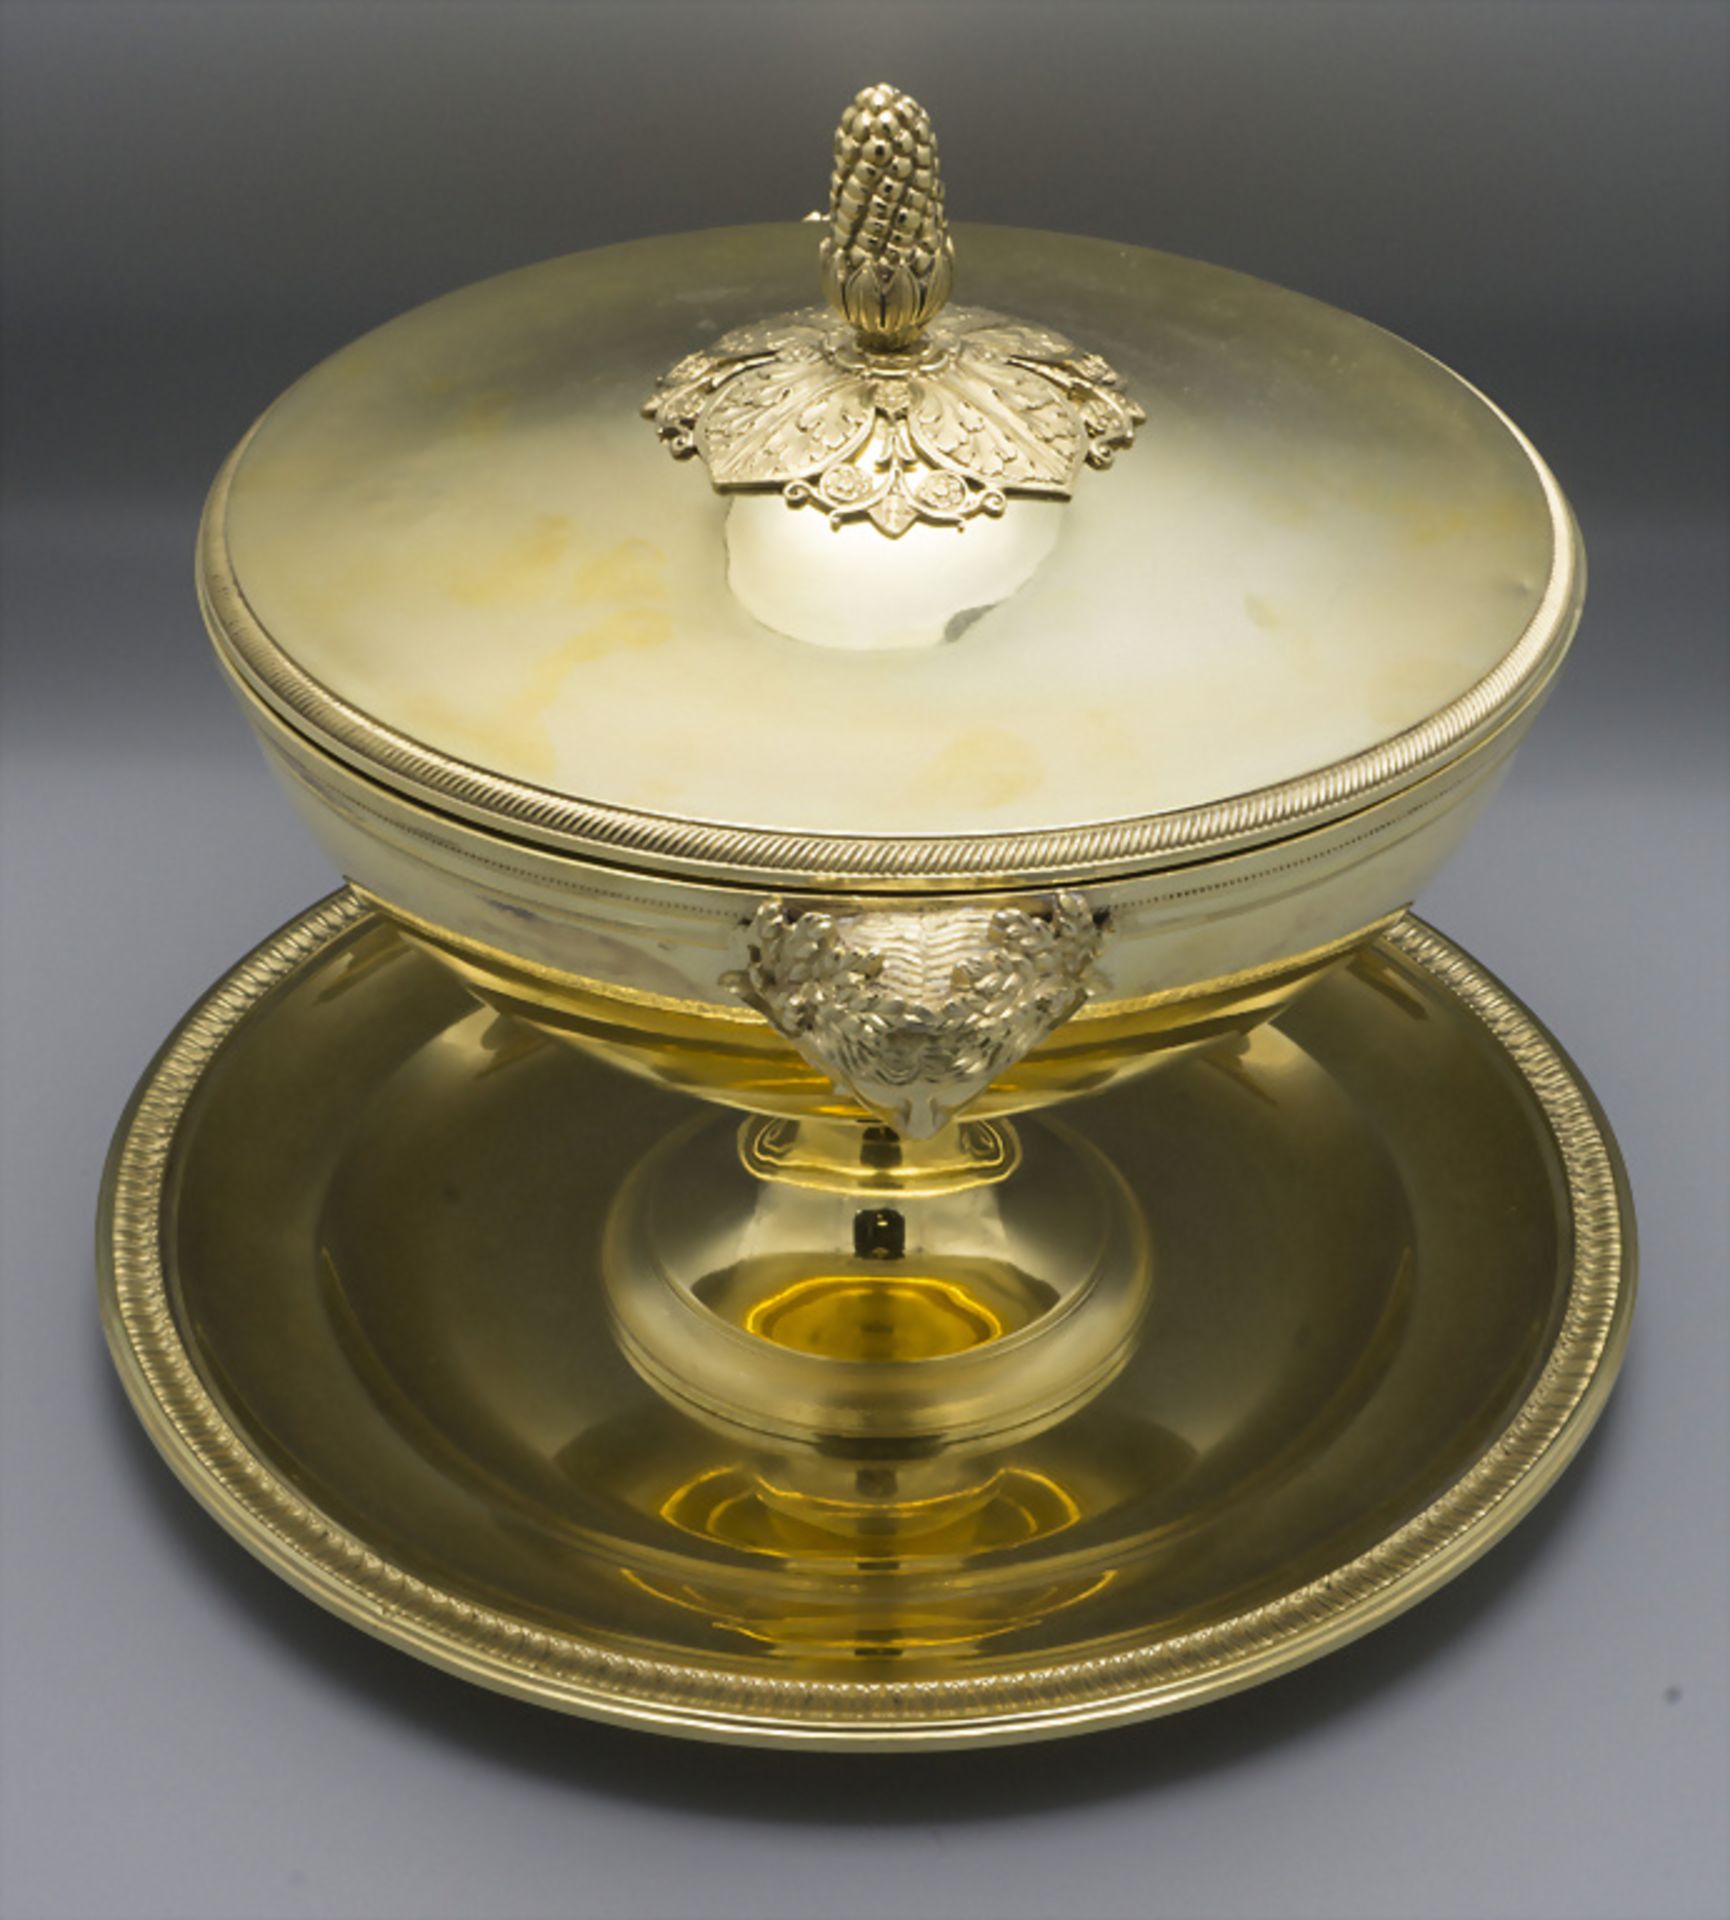 Deckelterrine auf Presentoire / A tureen with cover and plate, Emile Puiforcat, Paris, nach 1857 - Image 4 of 14